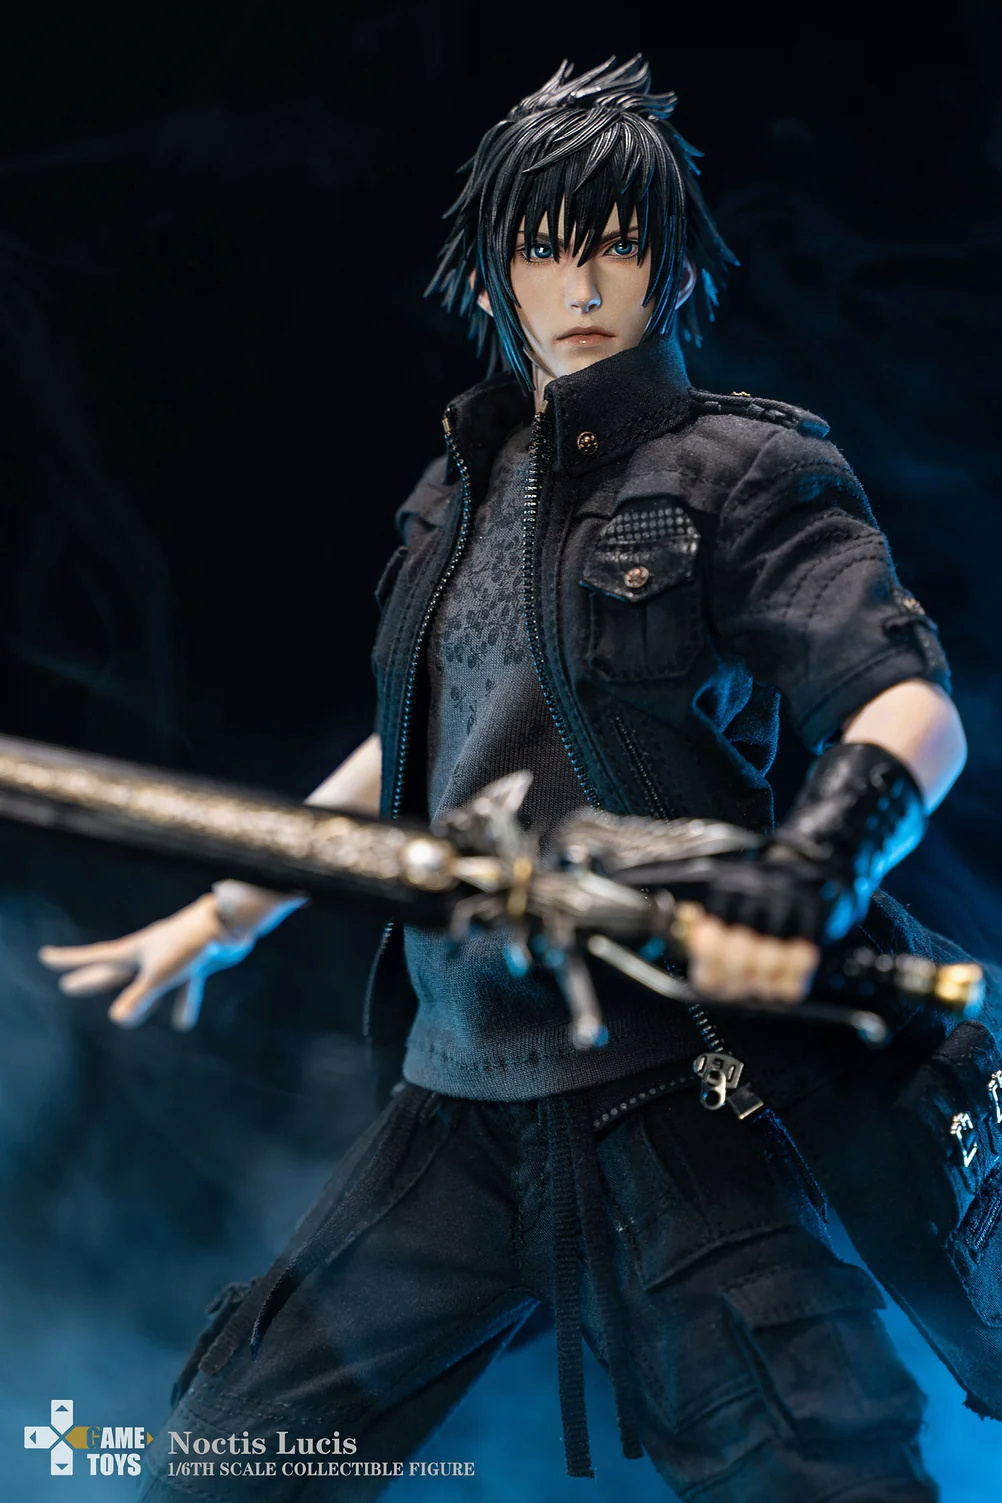 NEW PRODUCT: Gametoys Noctis Lucis, additional accessories, and throne 19_web10